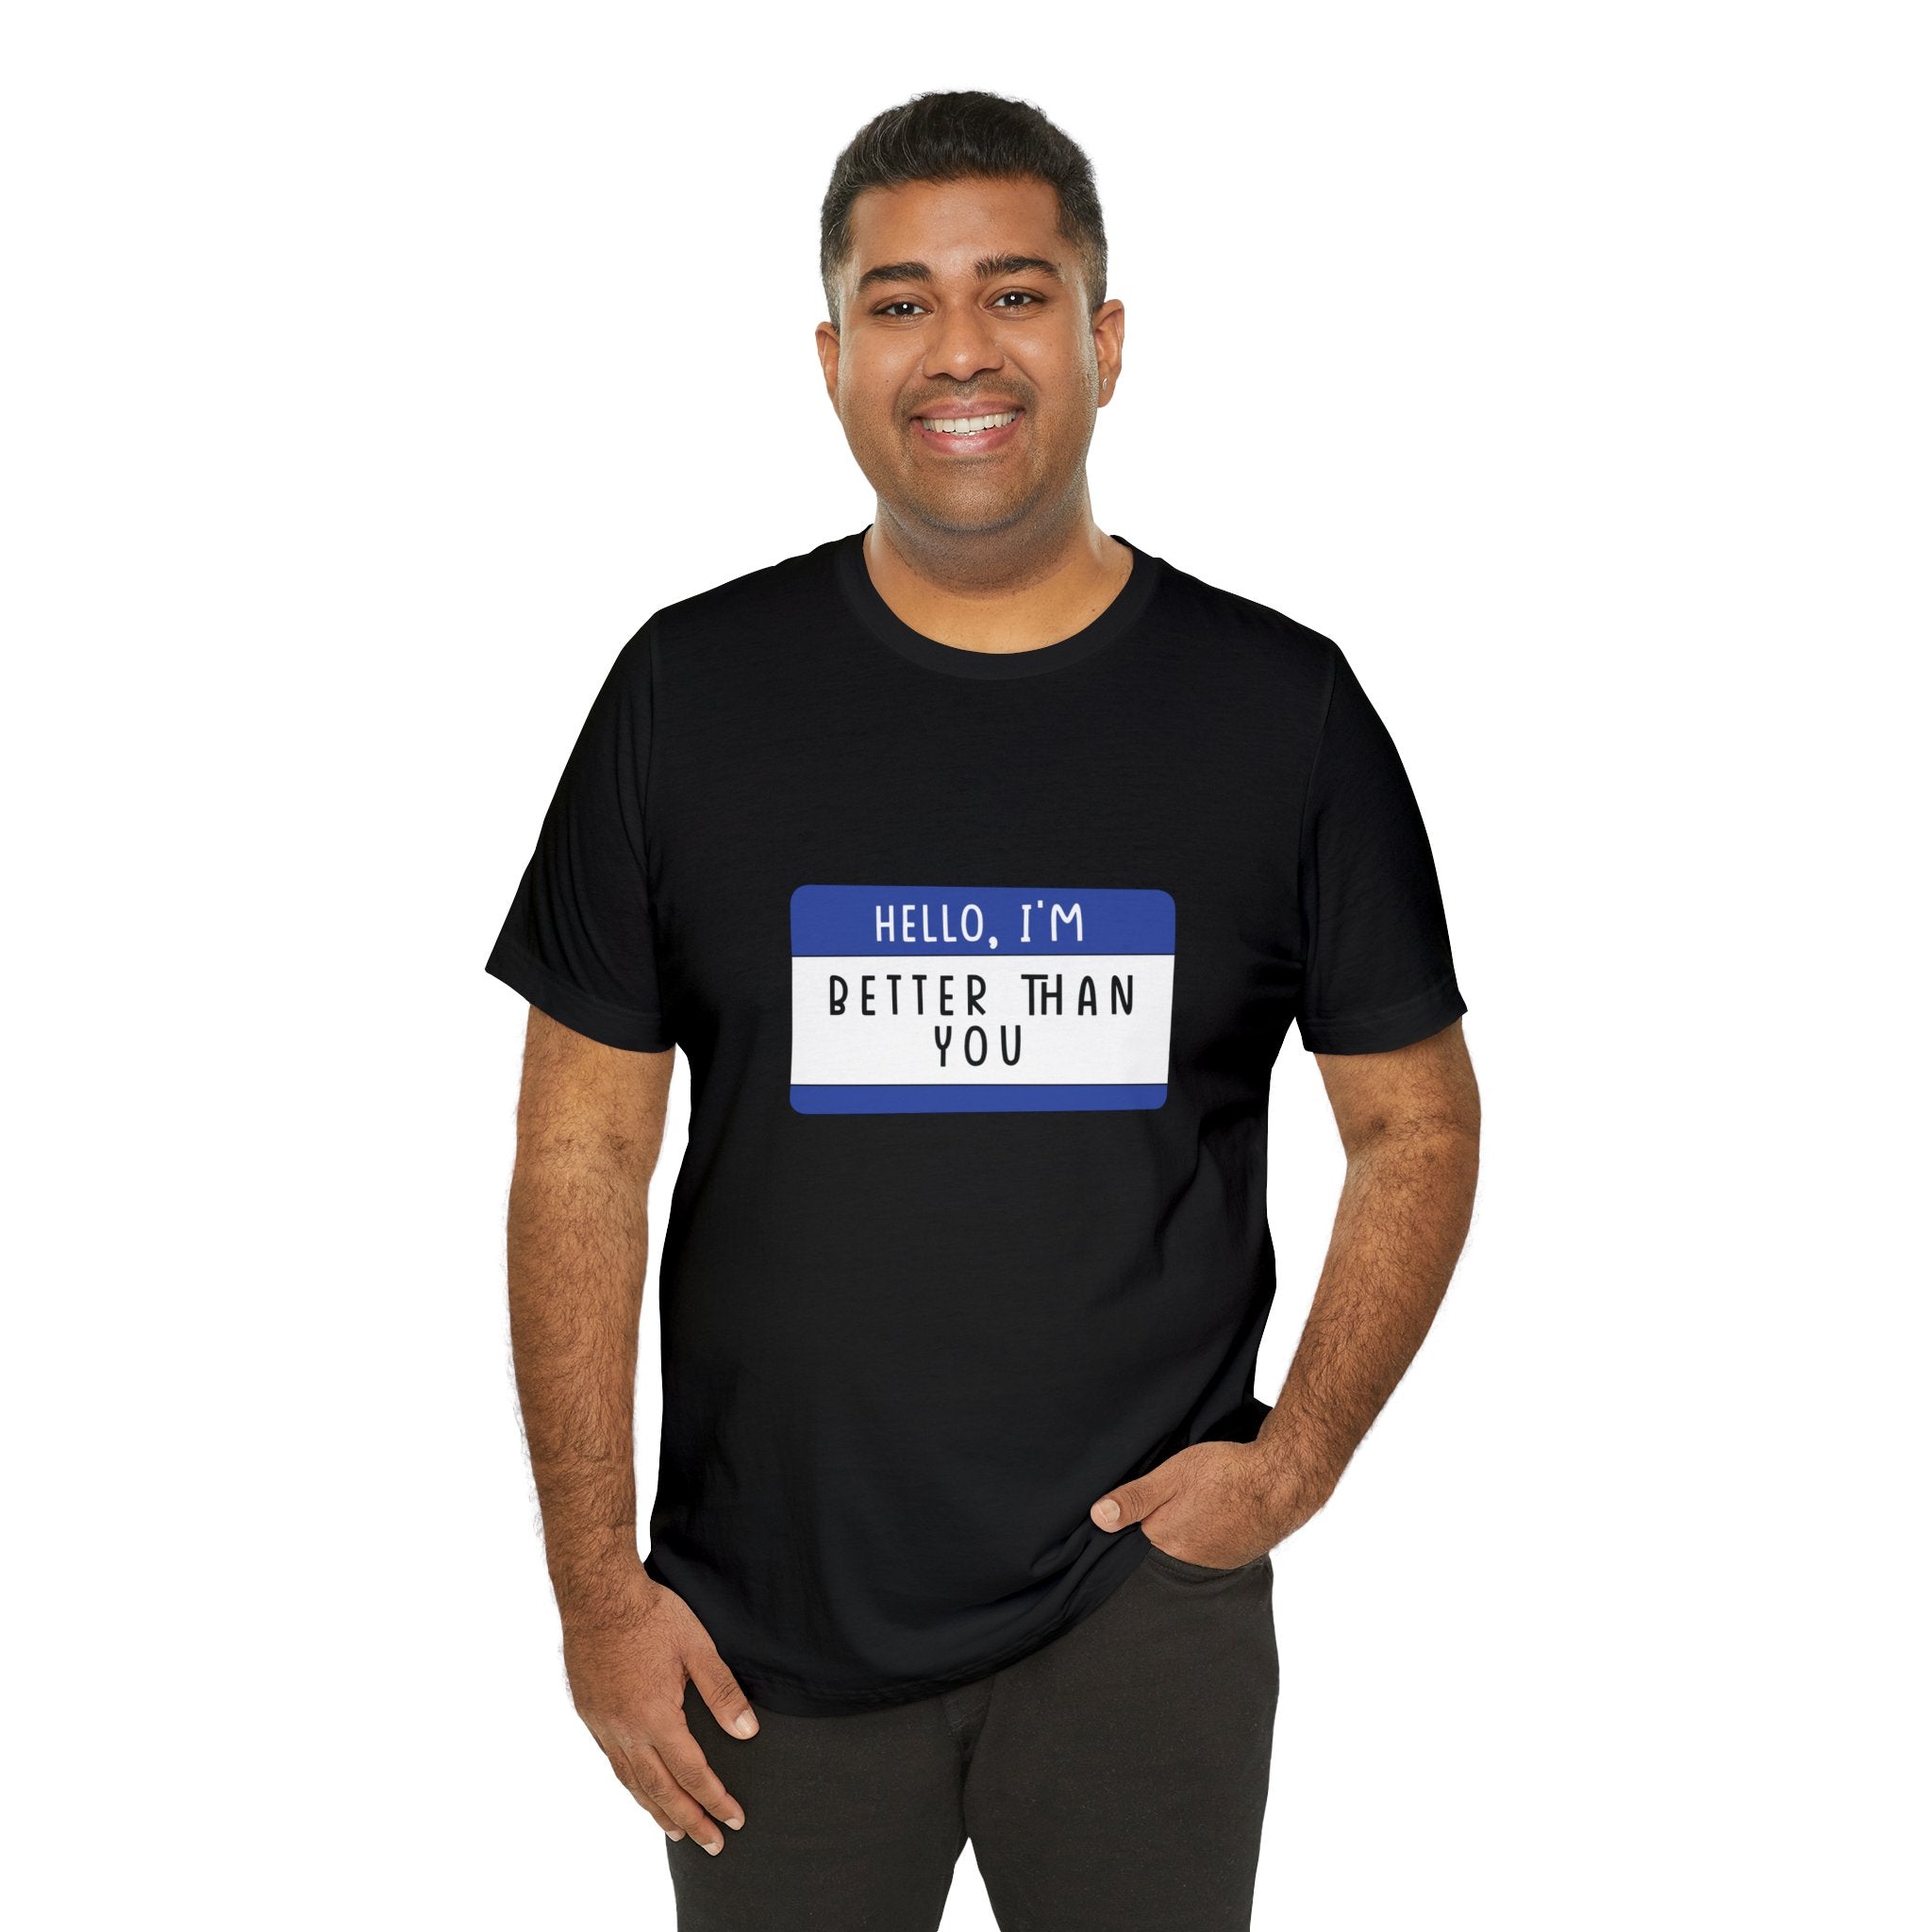 A man smiling and wearing a black "Hello, I'm Better Than You" t-shirt with geeky charm, featuring a blue name tag graphic.